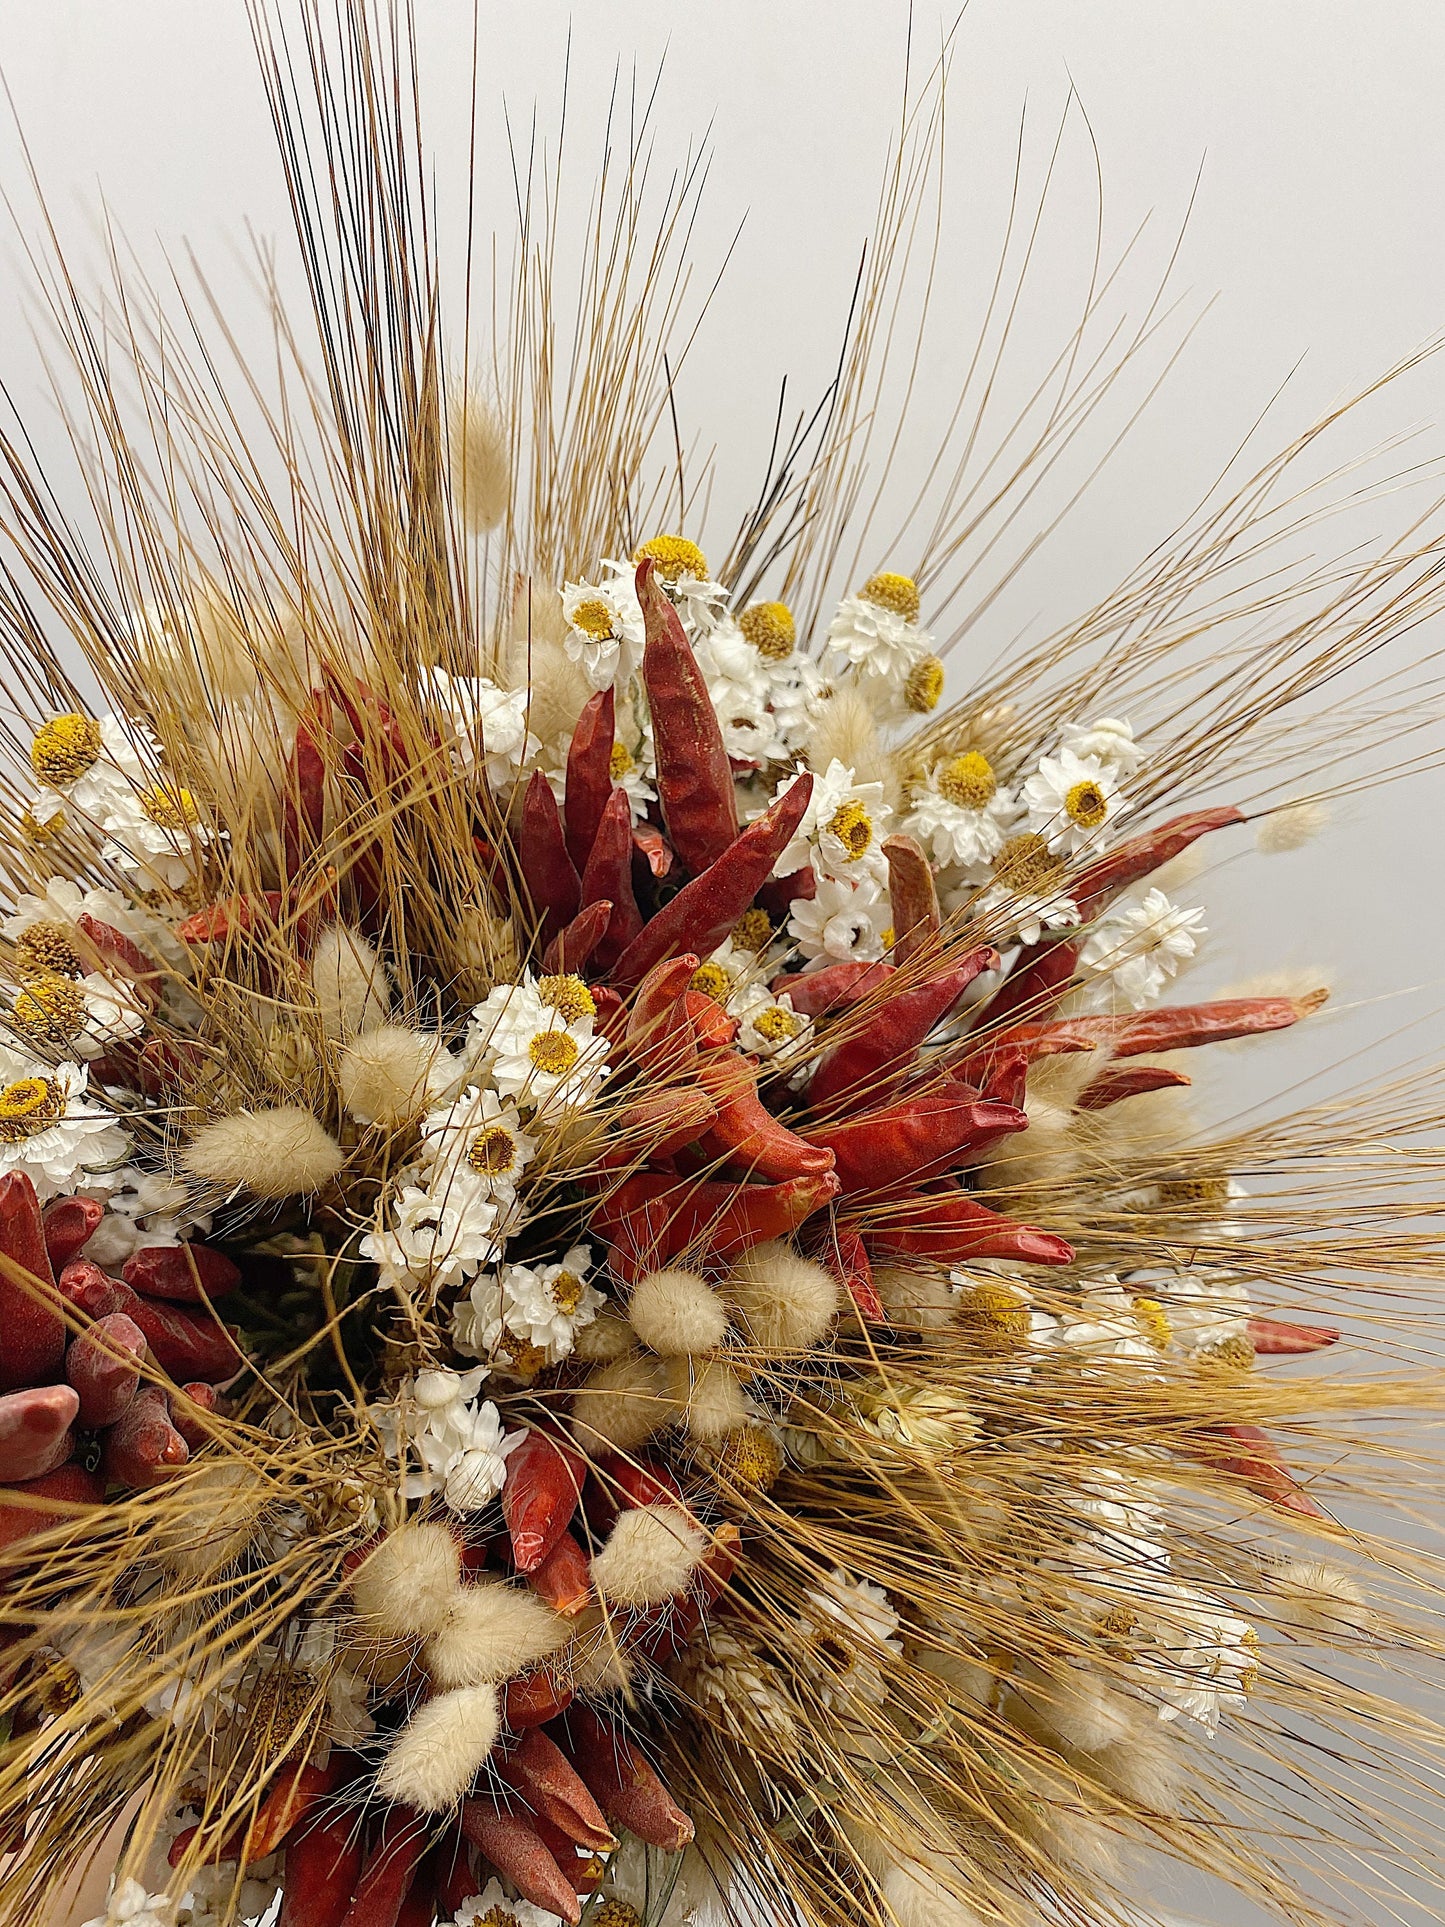 Fall Bouquet, Chili Peppers, Dried Flowers, Bunny Tails, Bridal, Red, Ammobium, Country, Preserved Flowers, Wheat